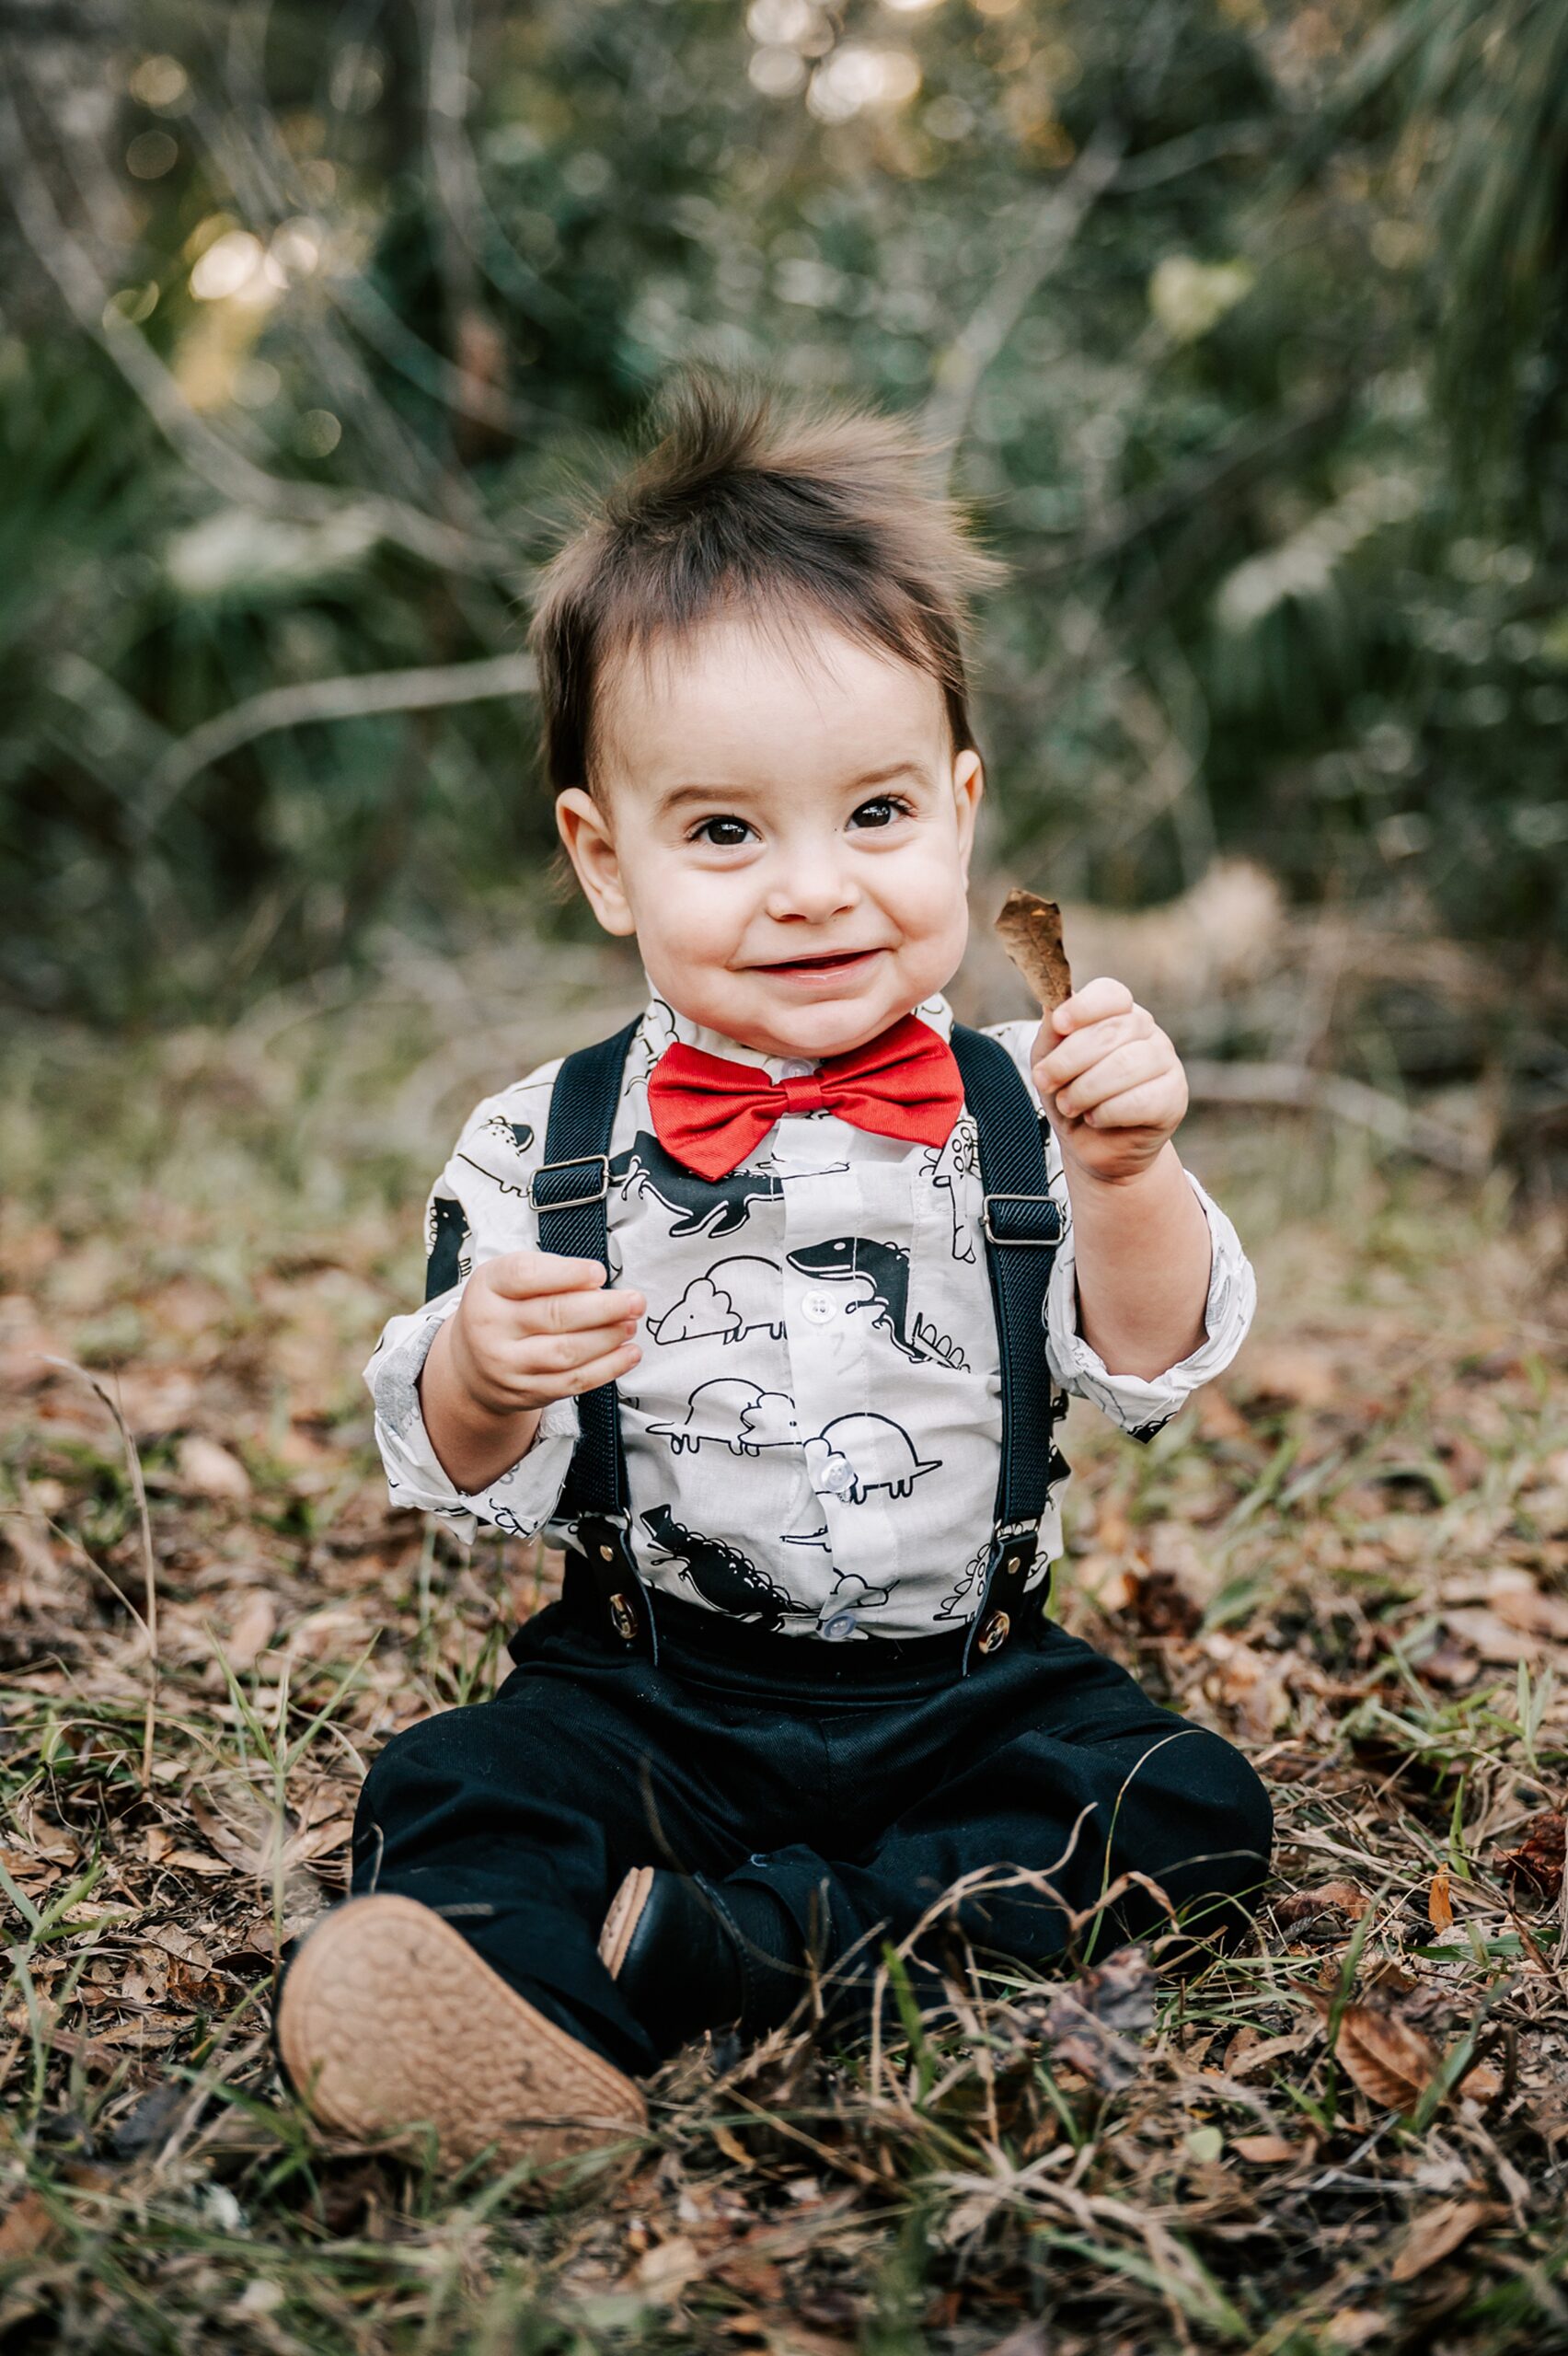 A young toddler in suspenders and a red bowtie sits in a forest while playing with leaves